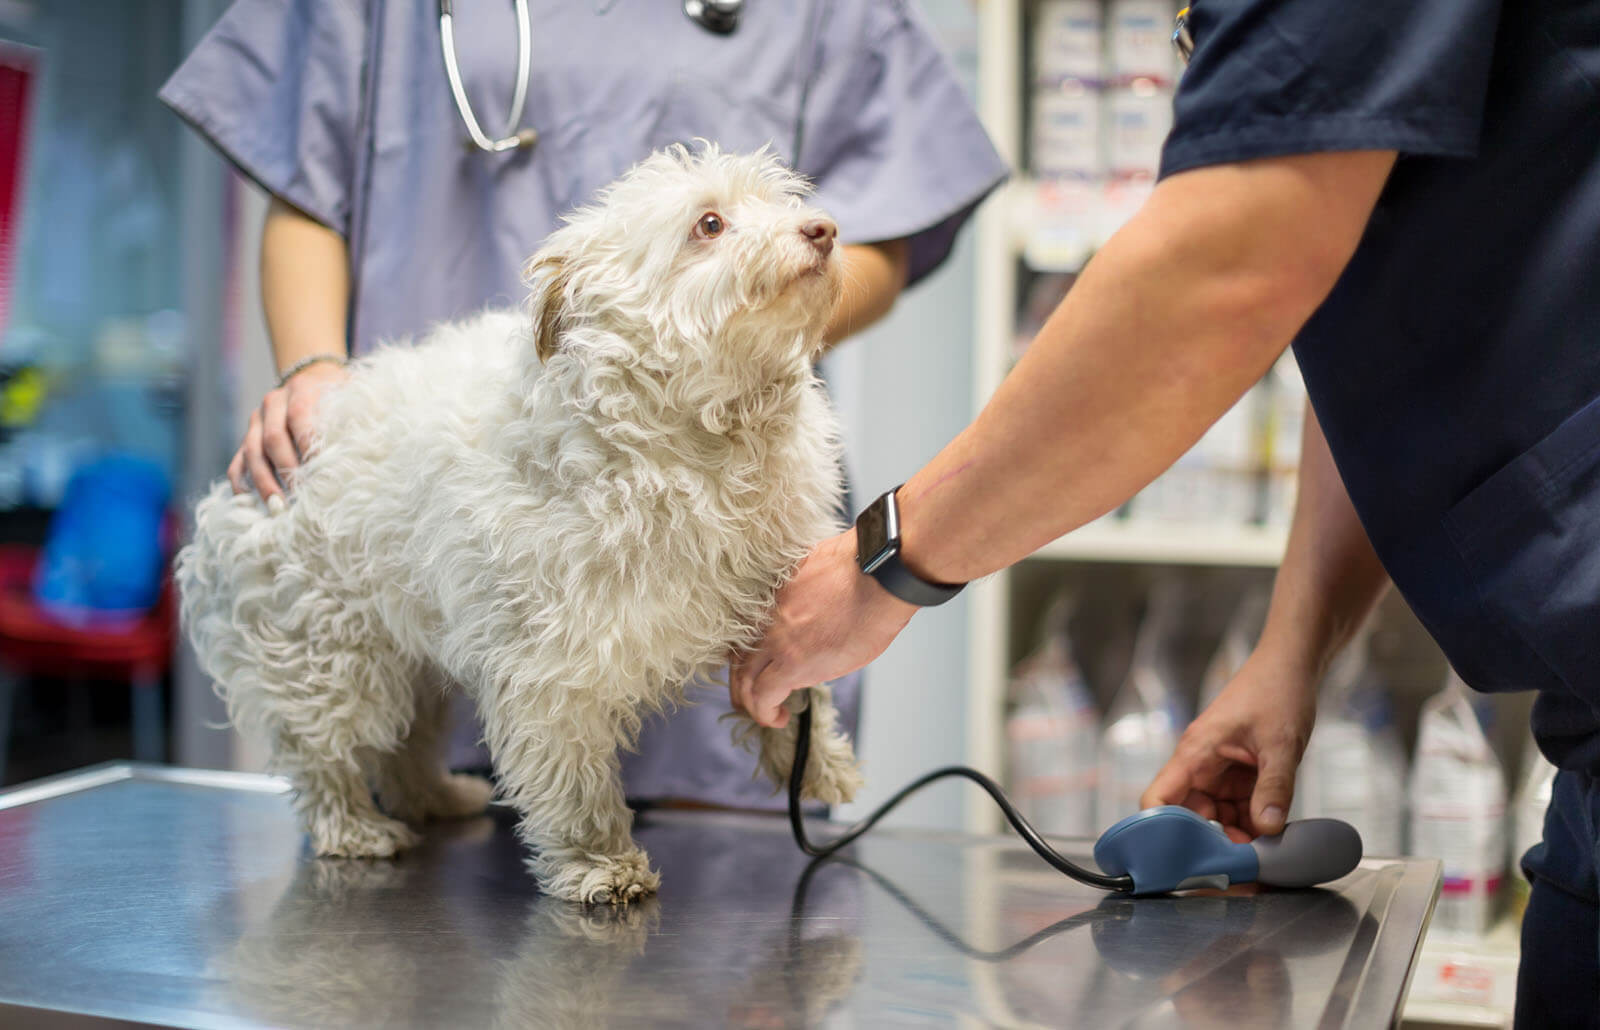 How do you test a dog for high blood pressure?